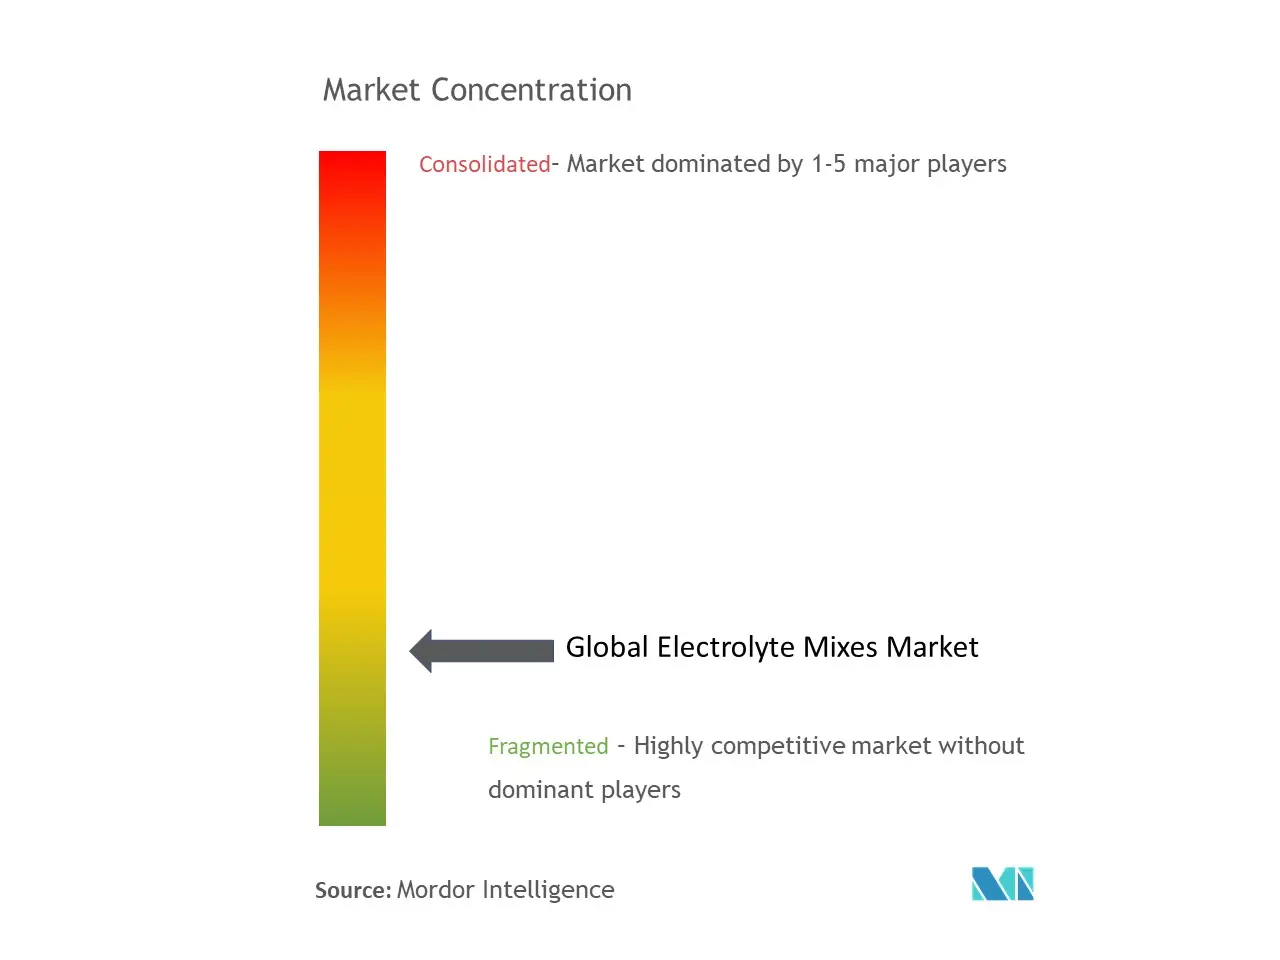 Electrolyte Mixes Market Concentration